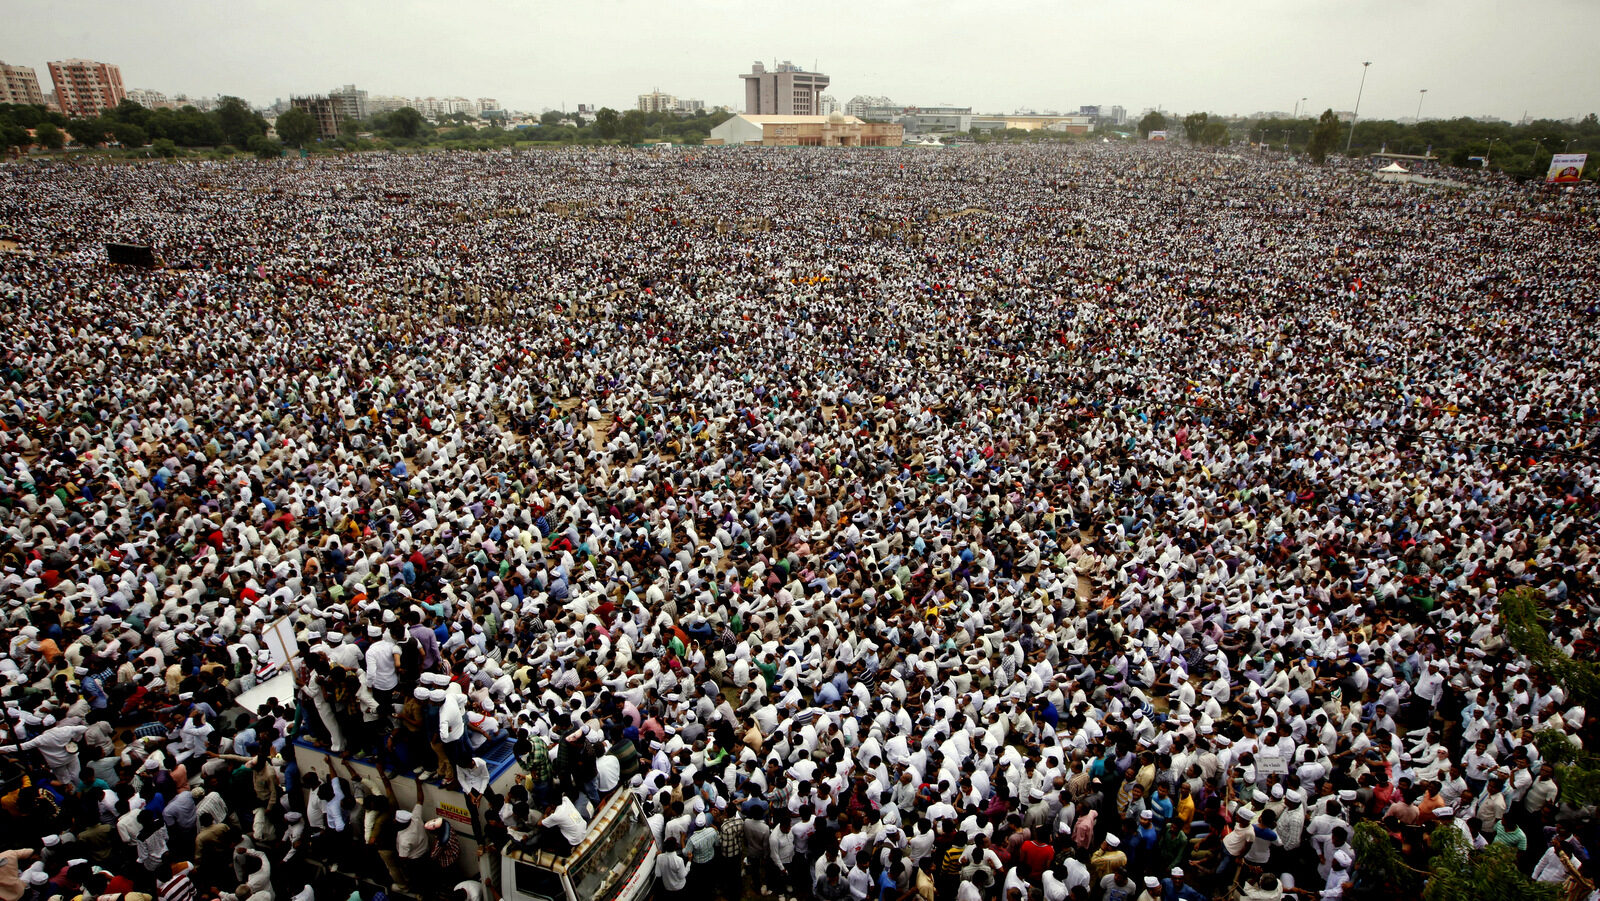 Tens of thousands of protestors from Gujarat’s Patel community participate in a rally in Ahmadabad, India, Tuesday, Aug. 25, 2015. The members of the community from this western Indian state are demanding affirmative action for better access to education and employment. (AP Photo/Ajit Solanki)